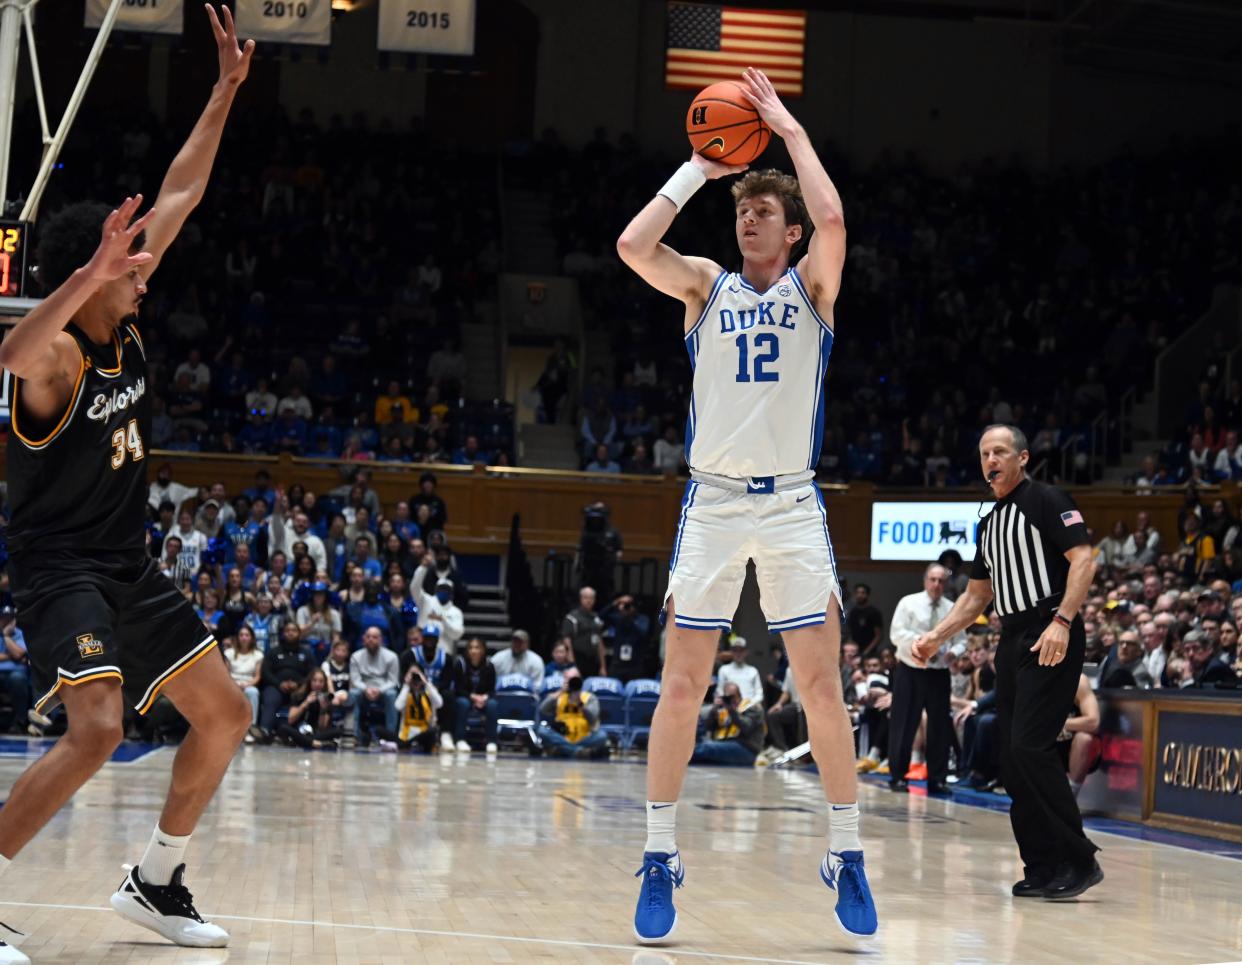 Former St. John's and Worcester Academy star T.J. Power, shown shooting a 3-pointer for Duke during a game last season, announced on Monday he will transfer to the University of Virginia next season.